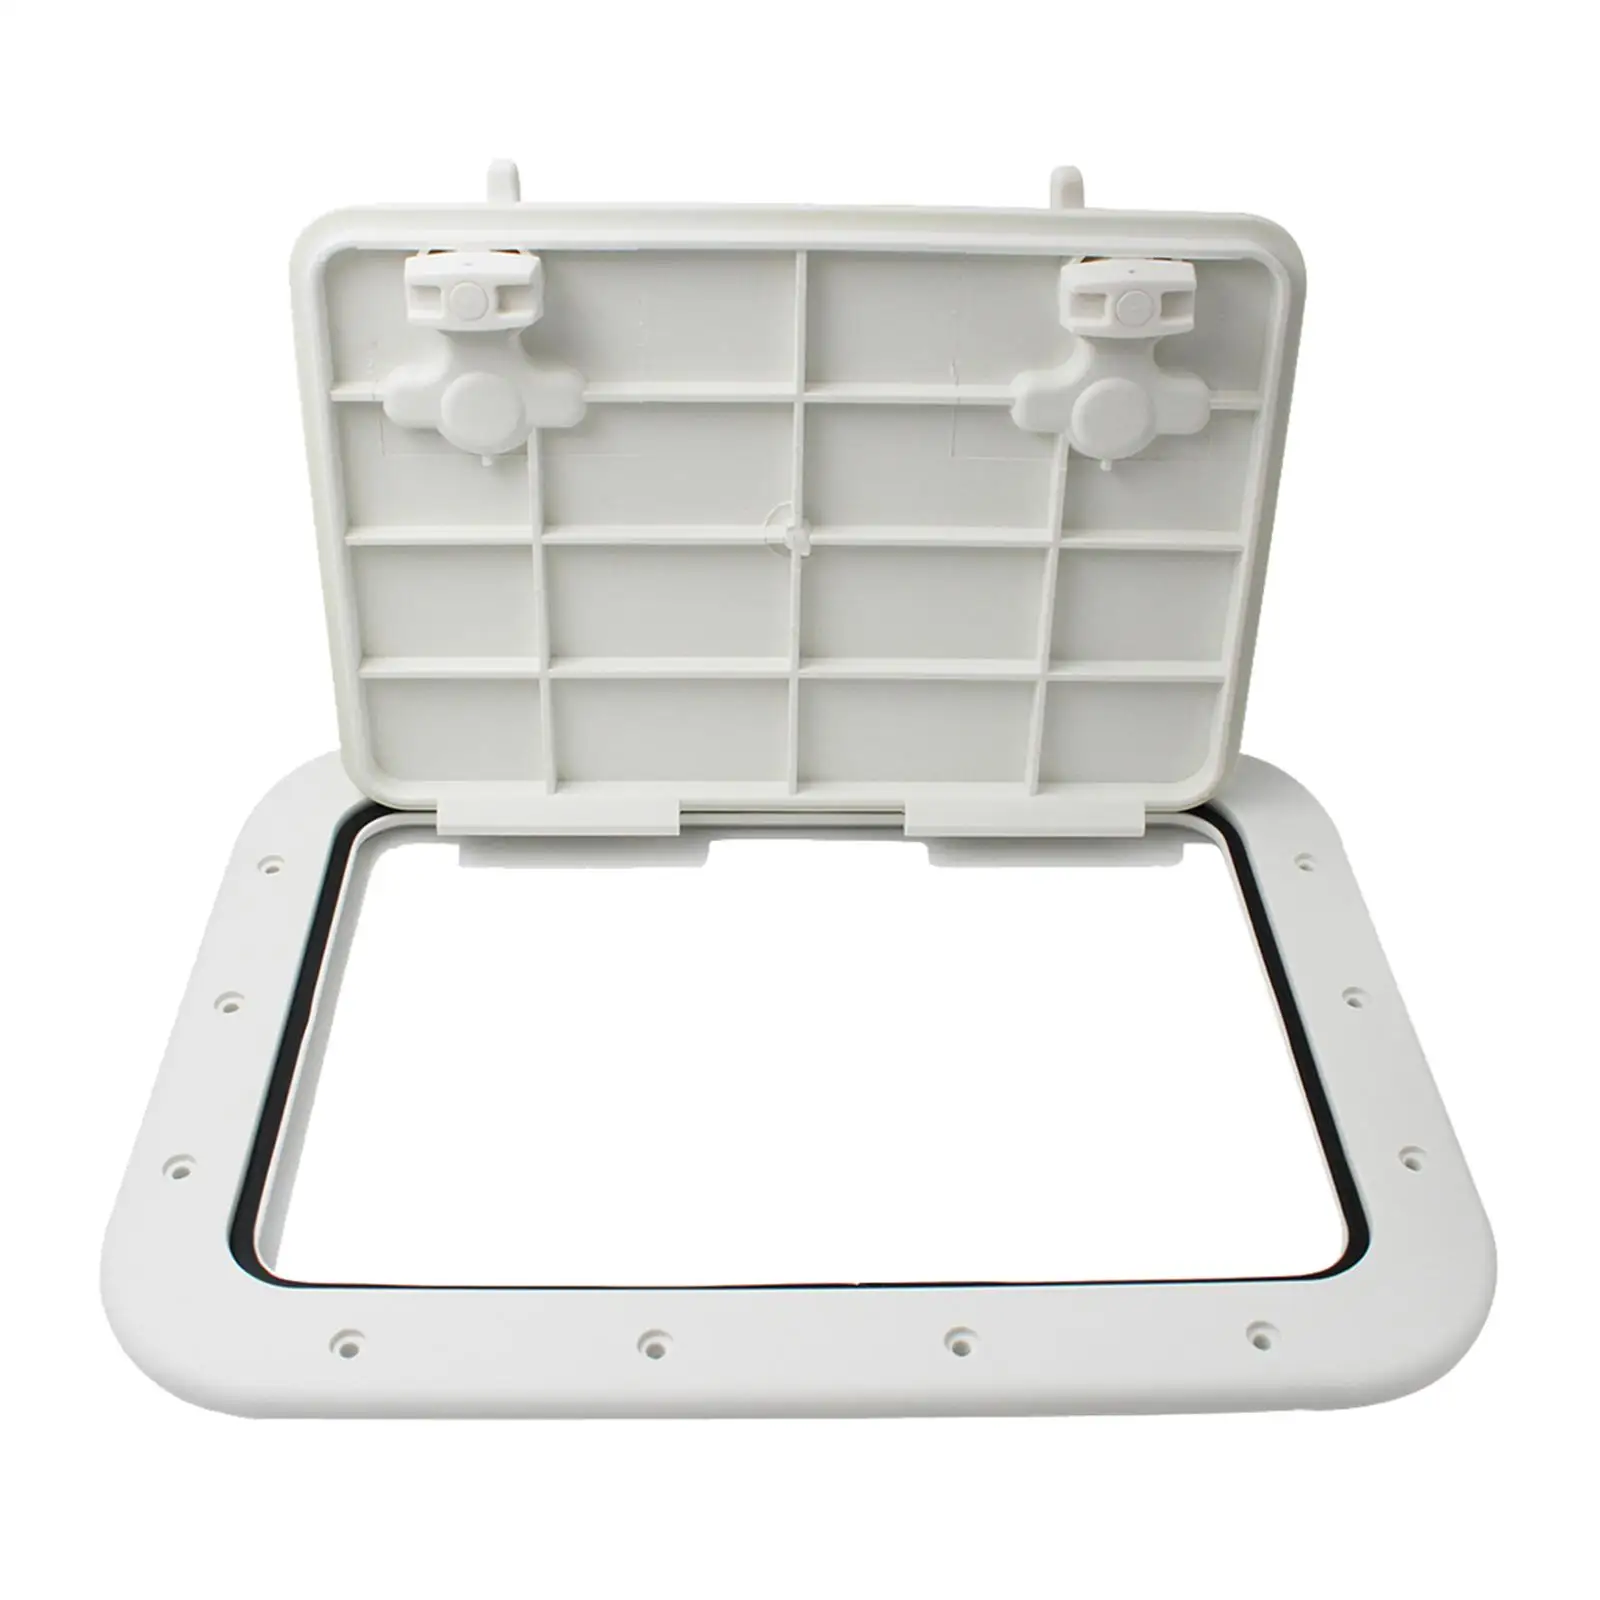 2X High Quality  Deck Access  Lid for Marine/ Boat/ Sailing